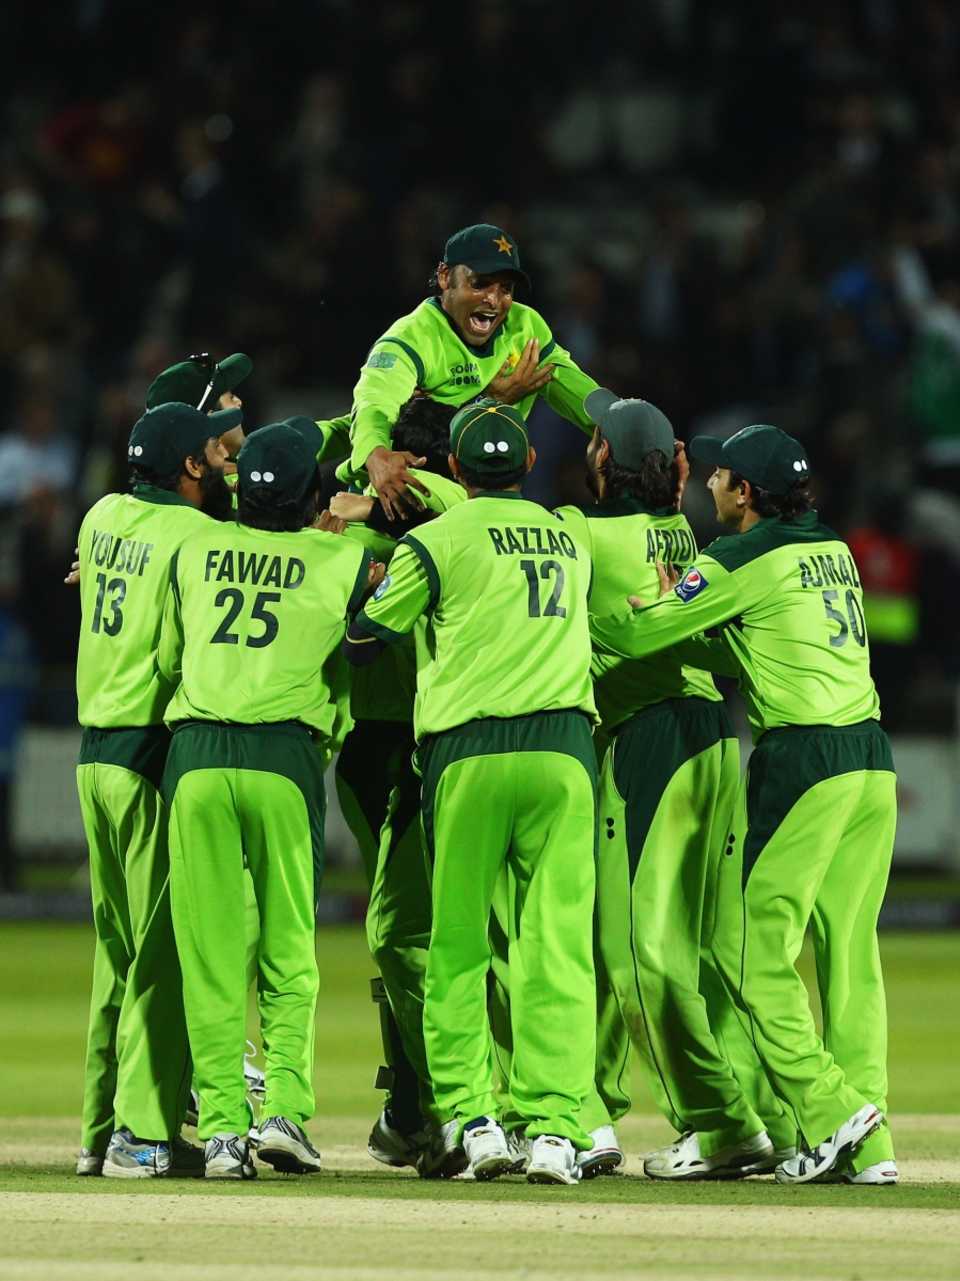 Pakistan were obviously over-joyed at the win, and even a 35-year-old Shoaib Akhtar was leaping around in celebration